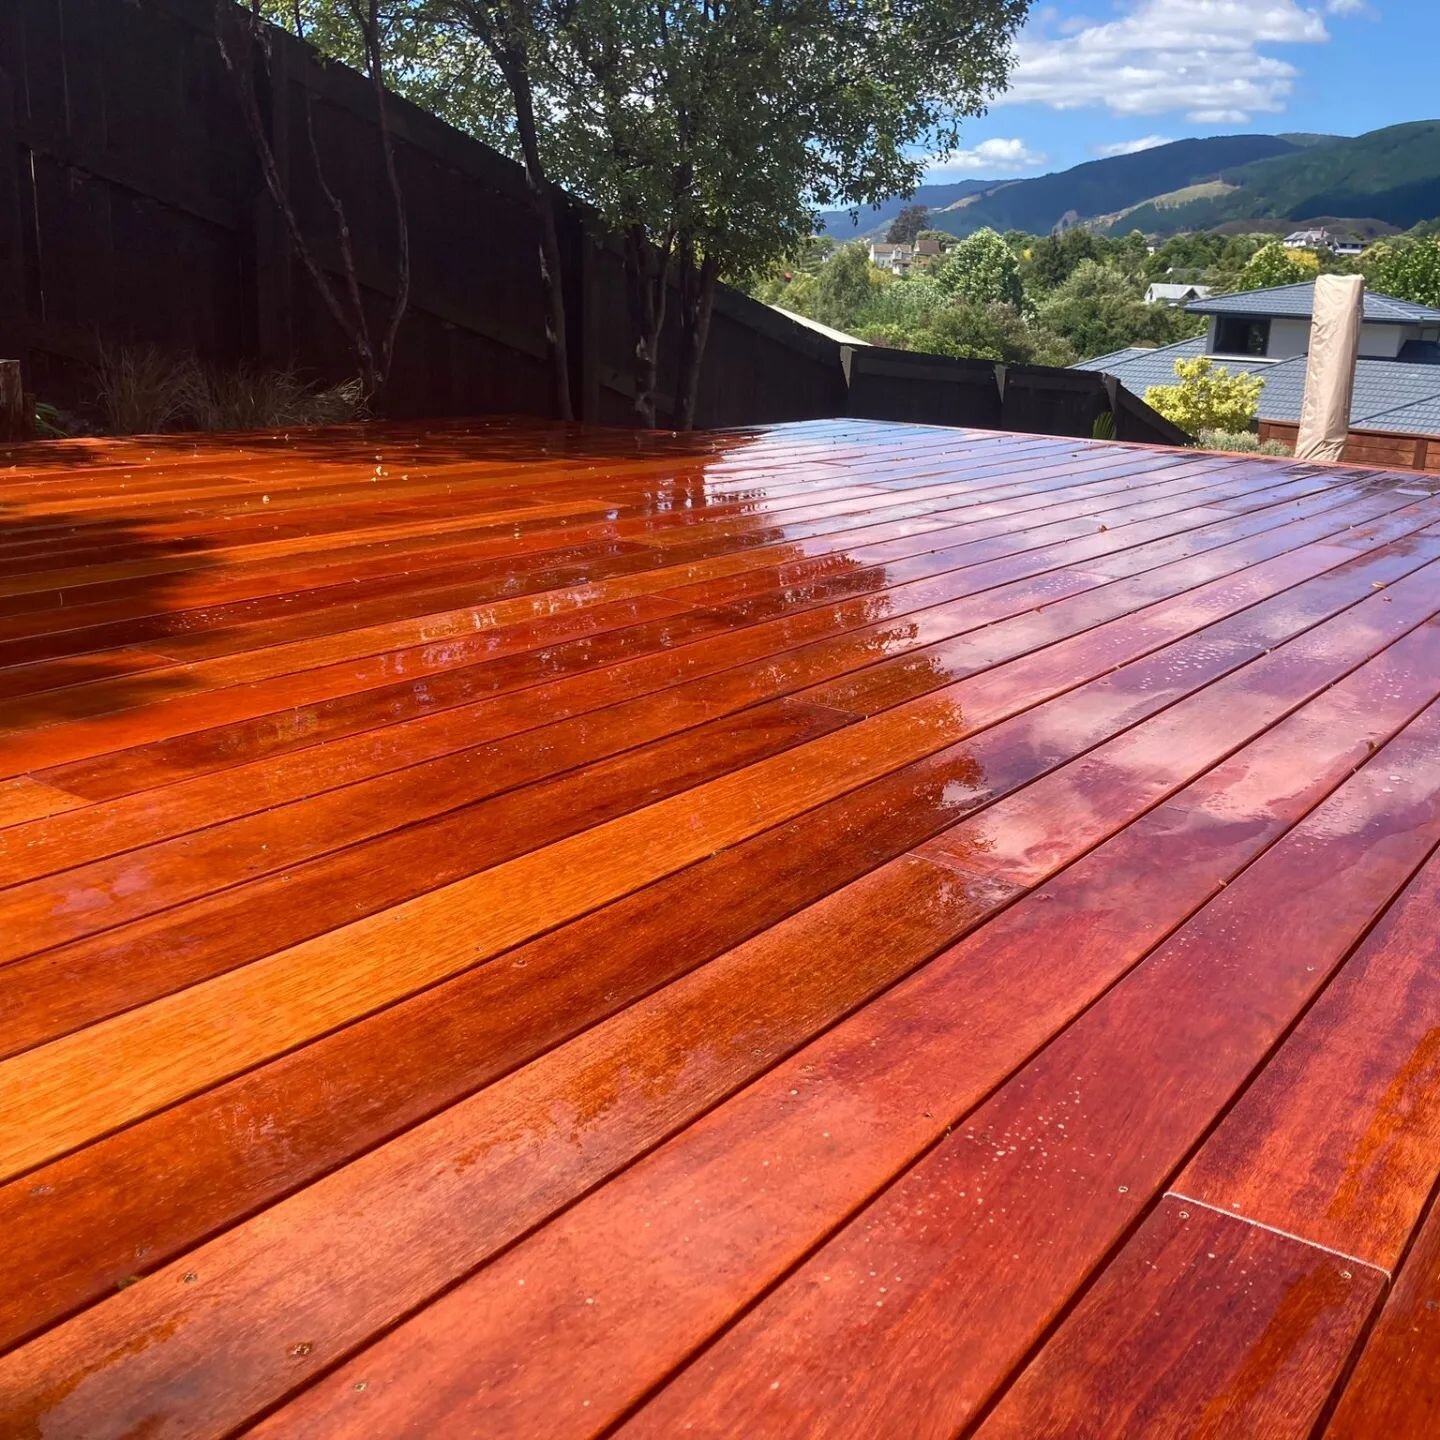 Some before and after shots of a deck we were very happy to help these clients with. Some decks need the @decks4u.co.nz touch 

#passionateaboutdecks #decks4u #reno #liveoutdoors #landscape #nzsmallbusiness #freequotes #great #building #nelsontasman